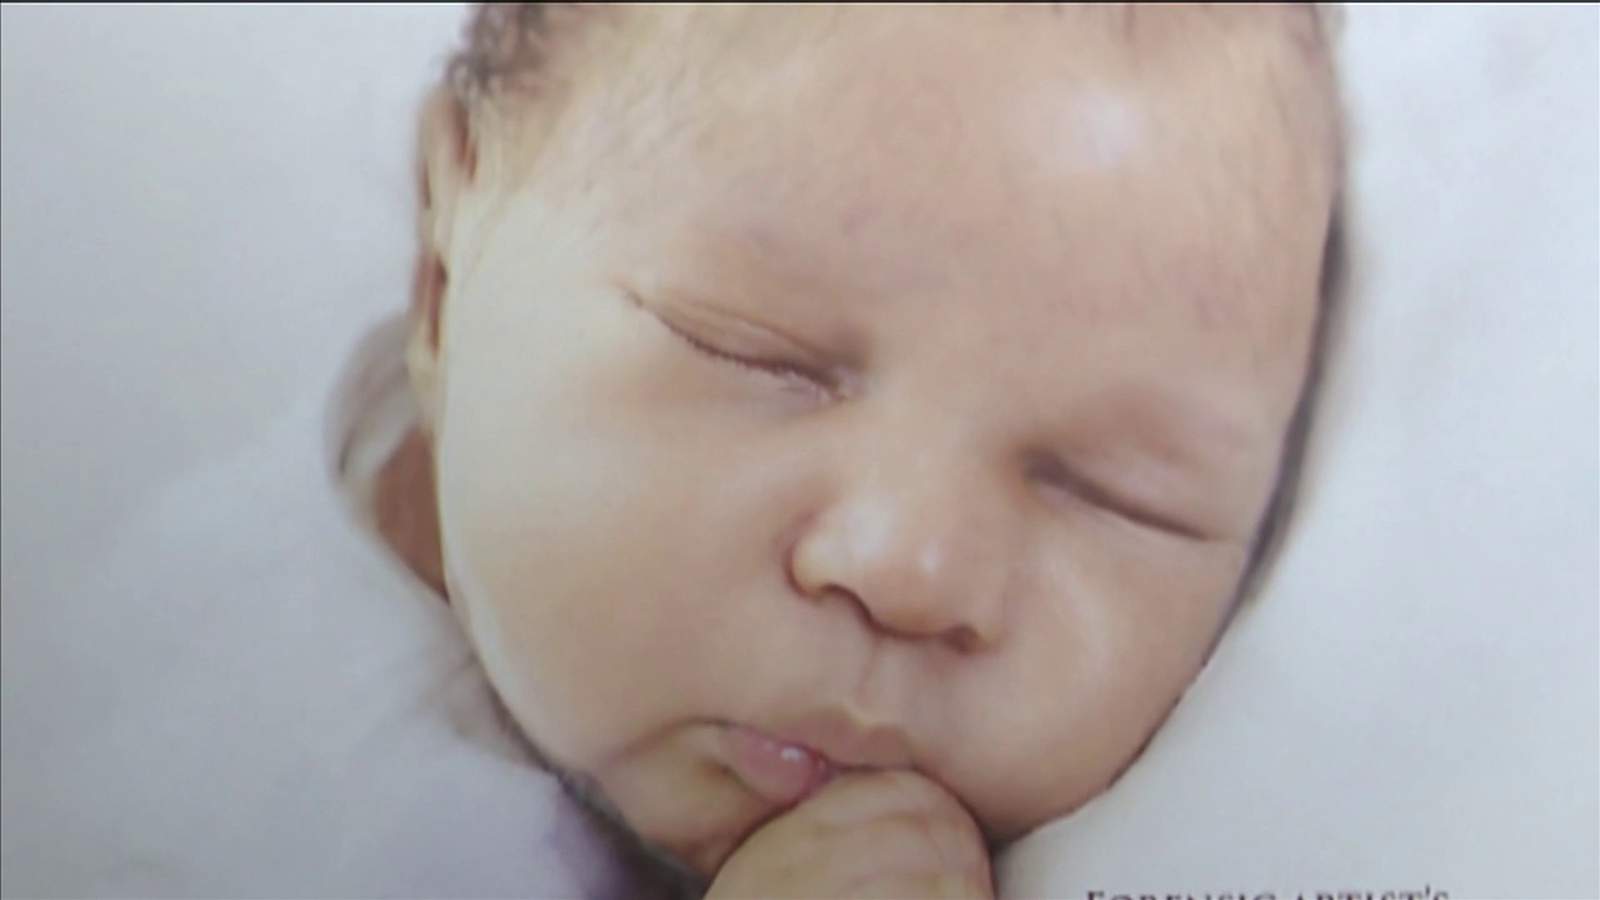 Florida detectives still looking for parents of baby found dead in ocean